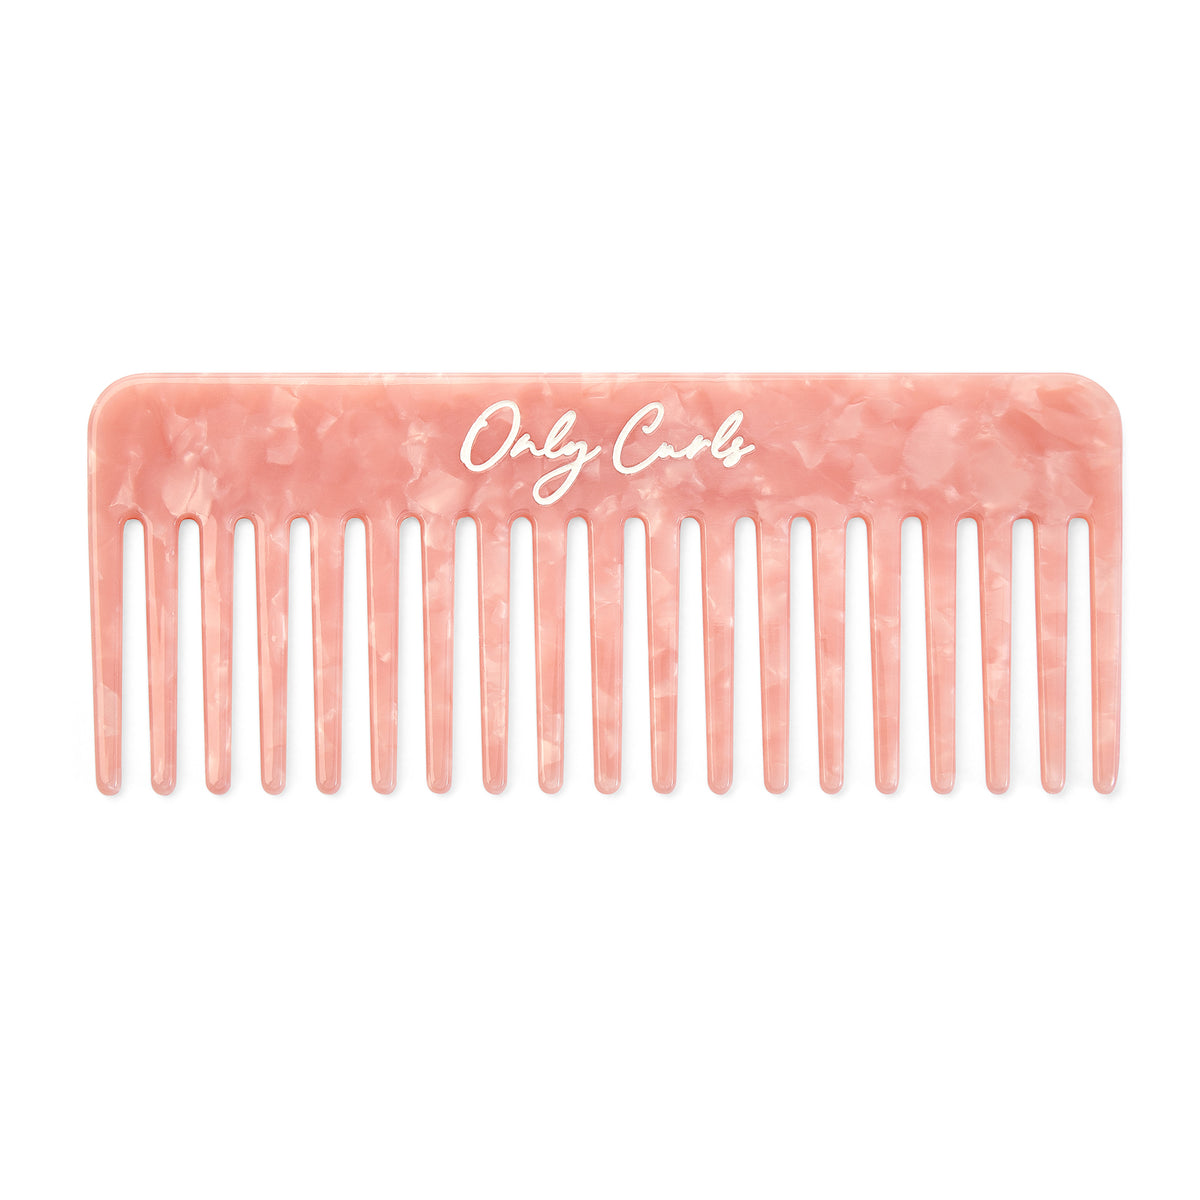 Only Curls Pink Shimmer Comb - Only Curls